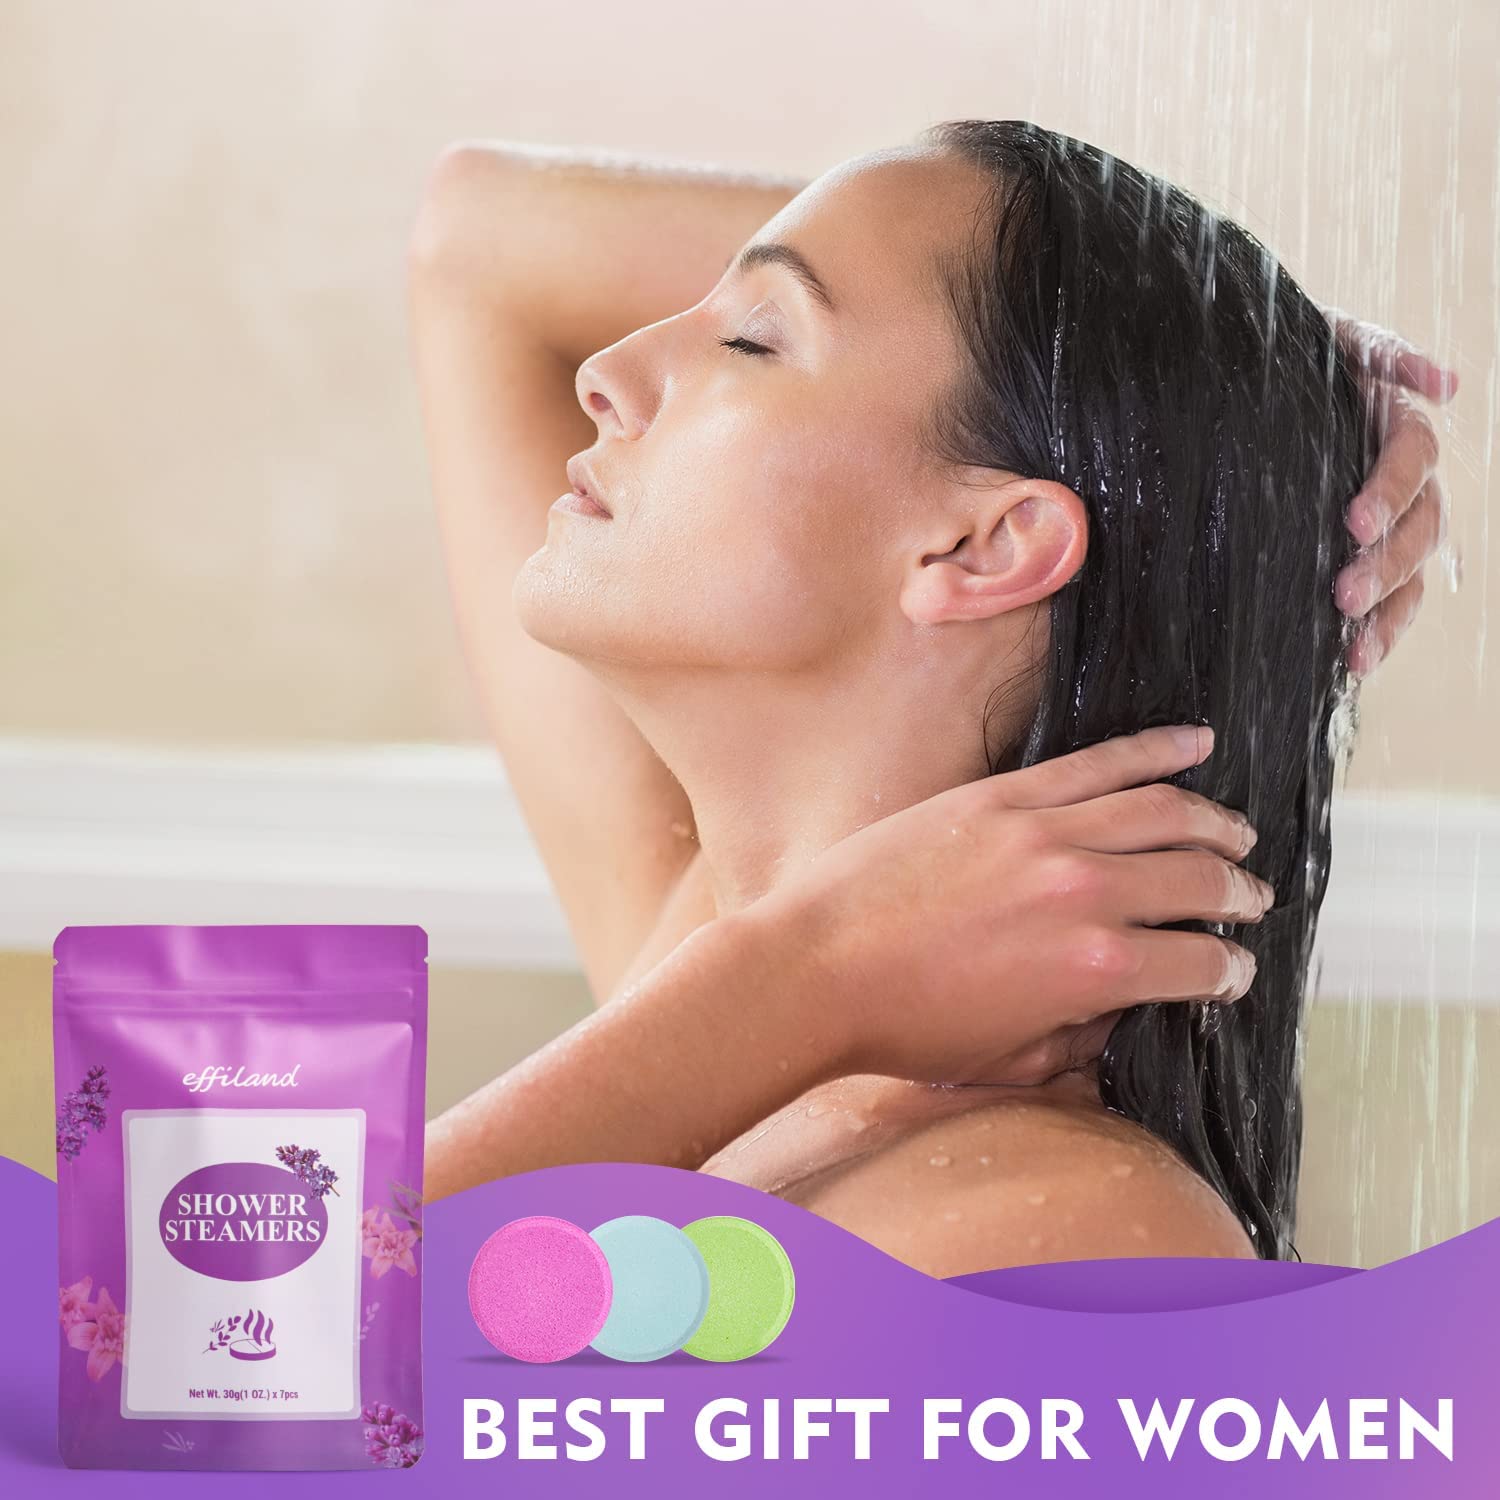 EFFILAND Shower Steamers Aromatherapy-Lavender(7pcs)【US ONLY】